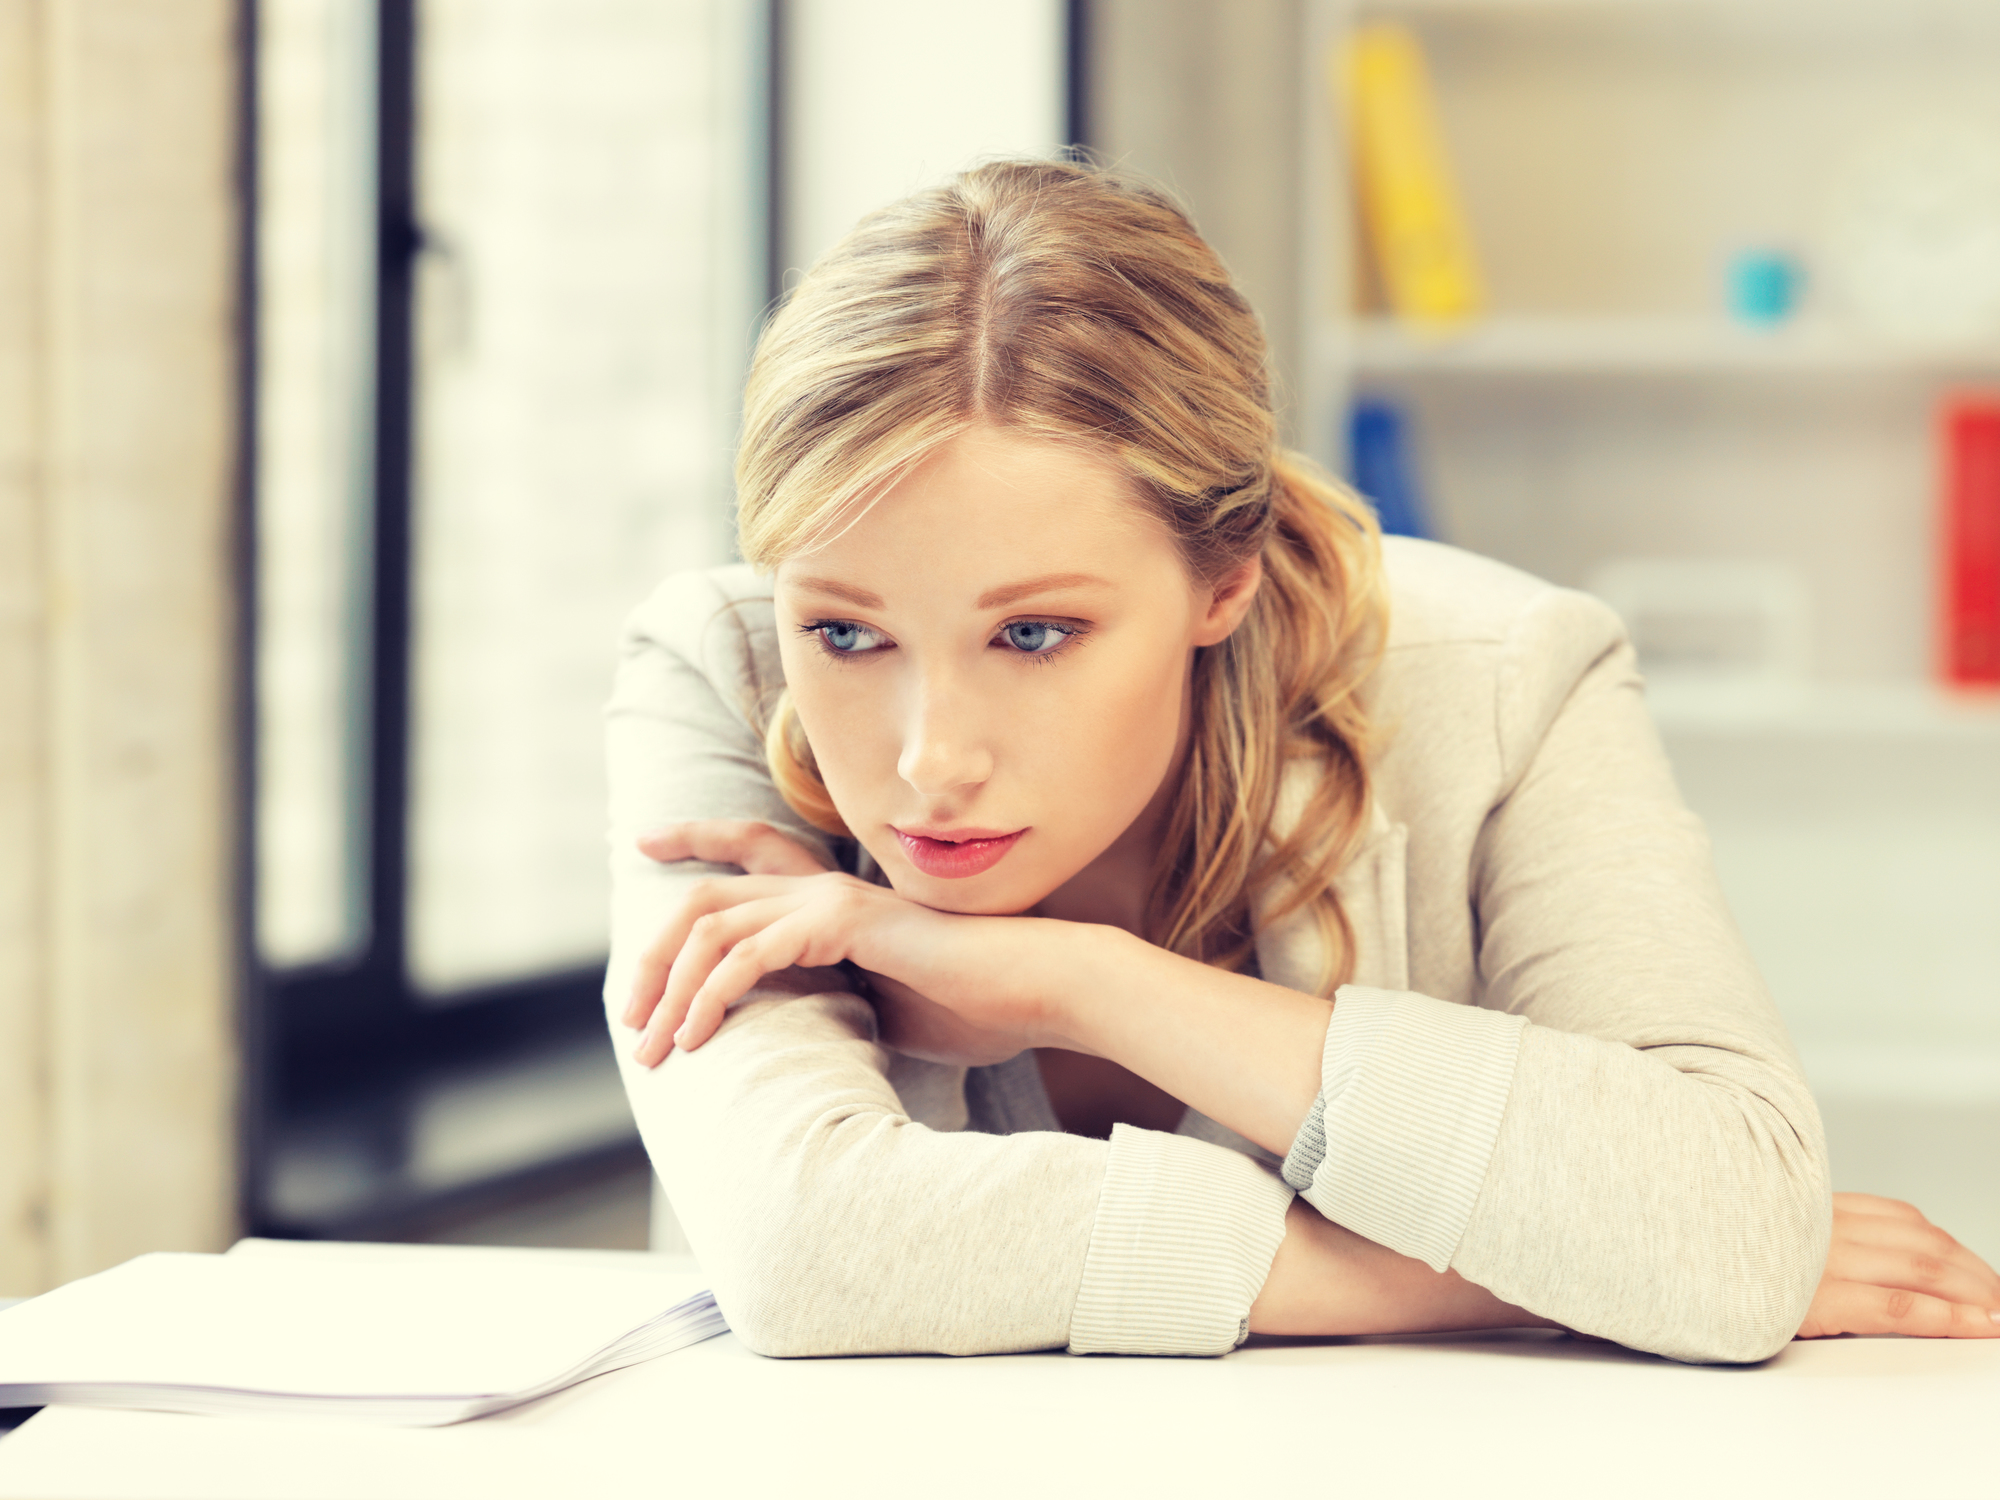 bright picture of unhappy woman in office